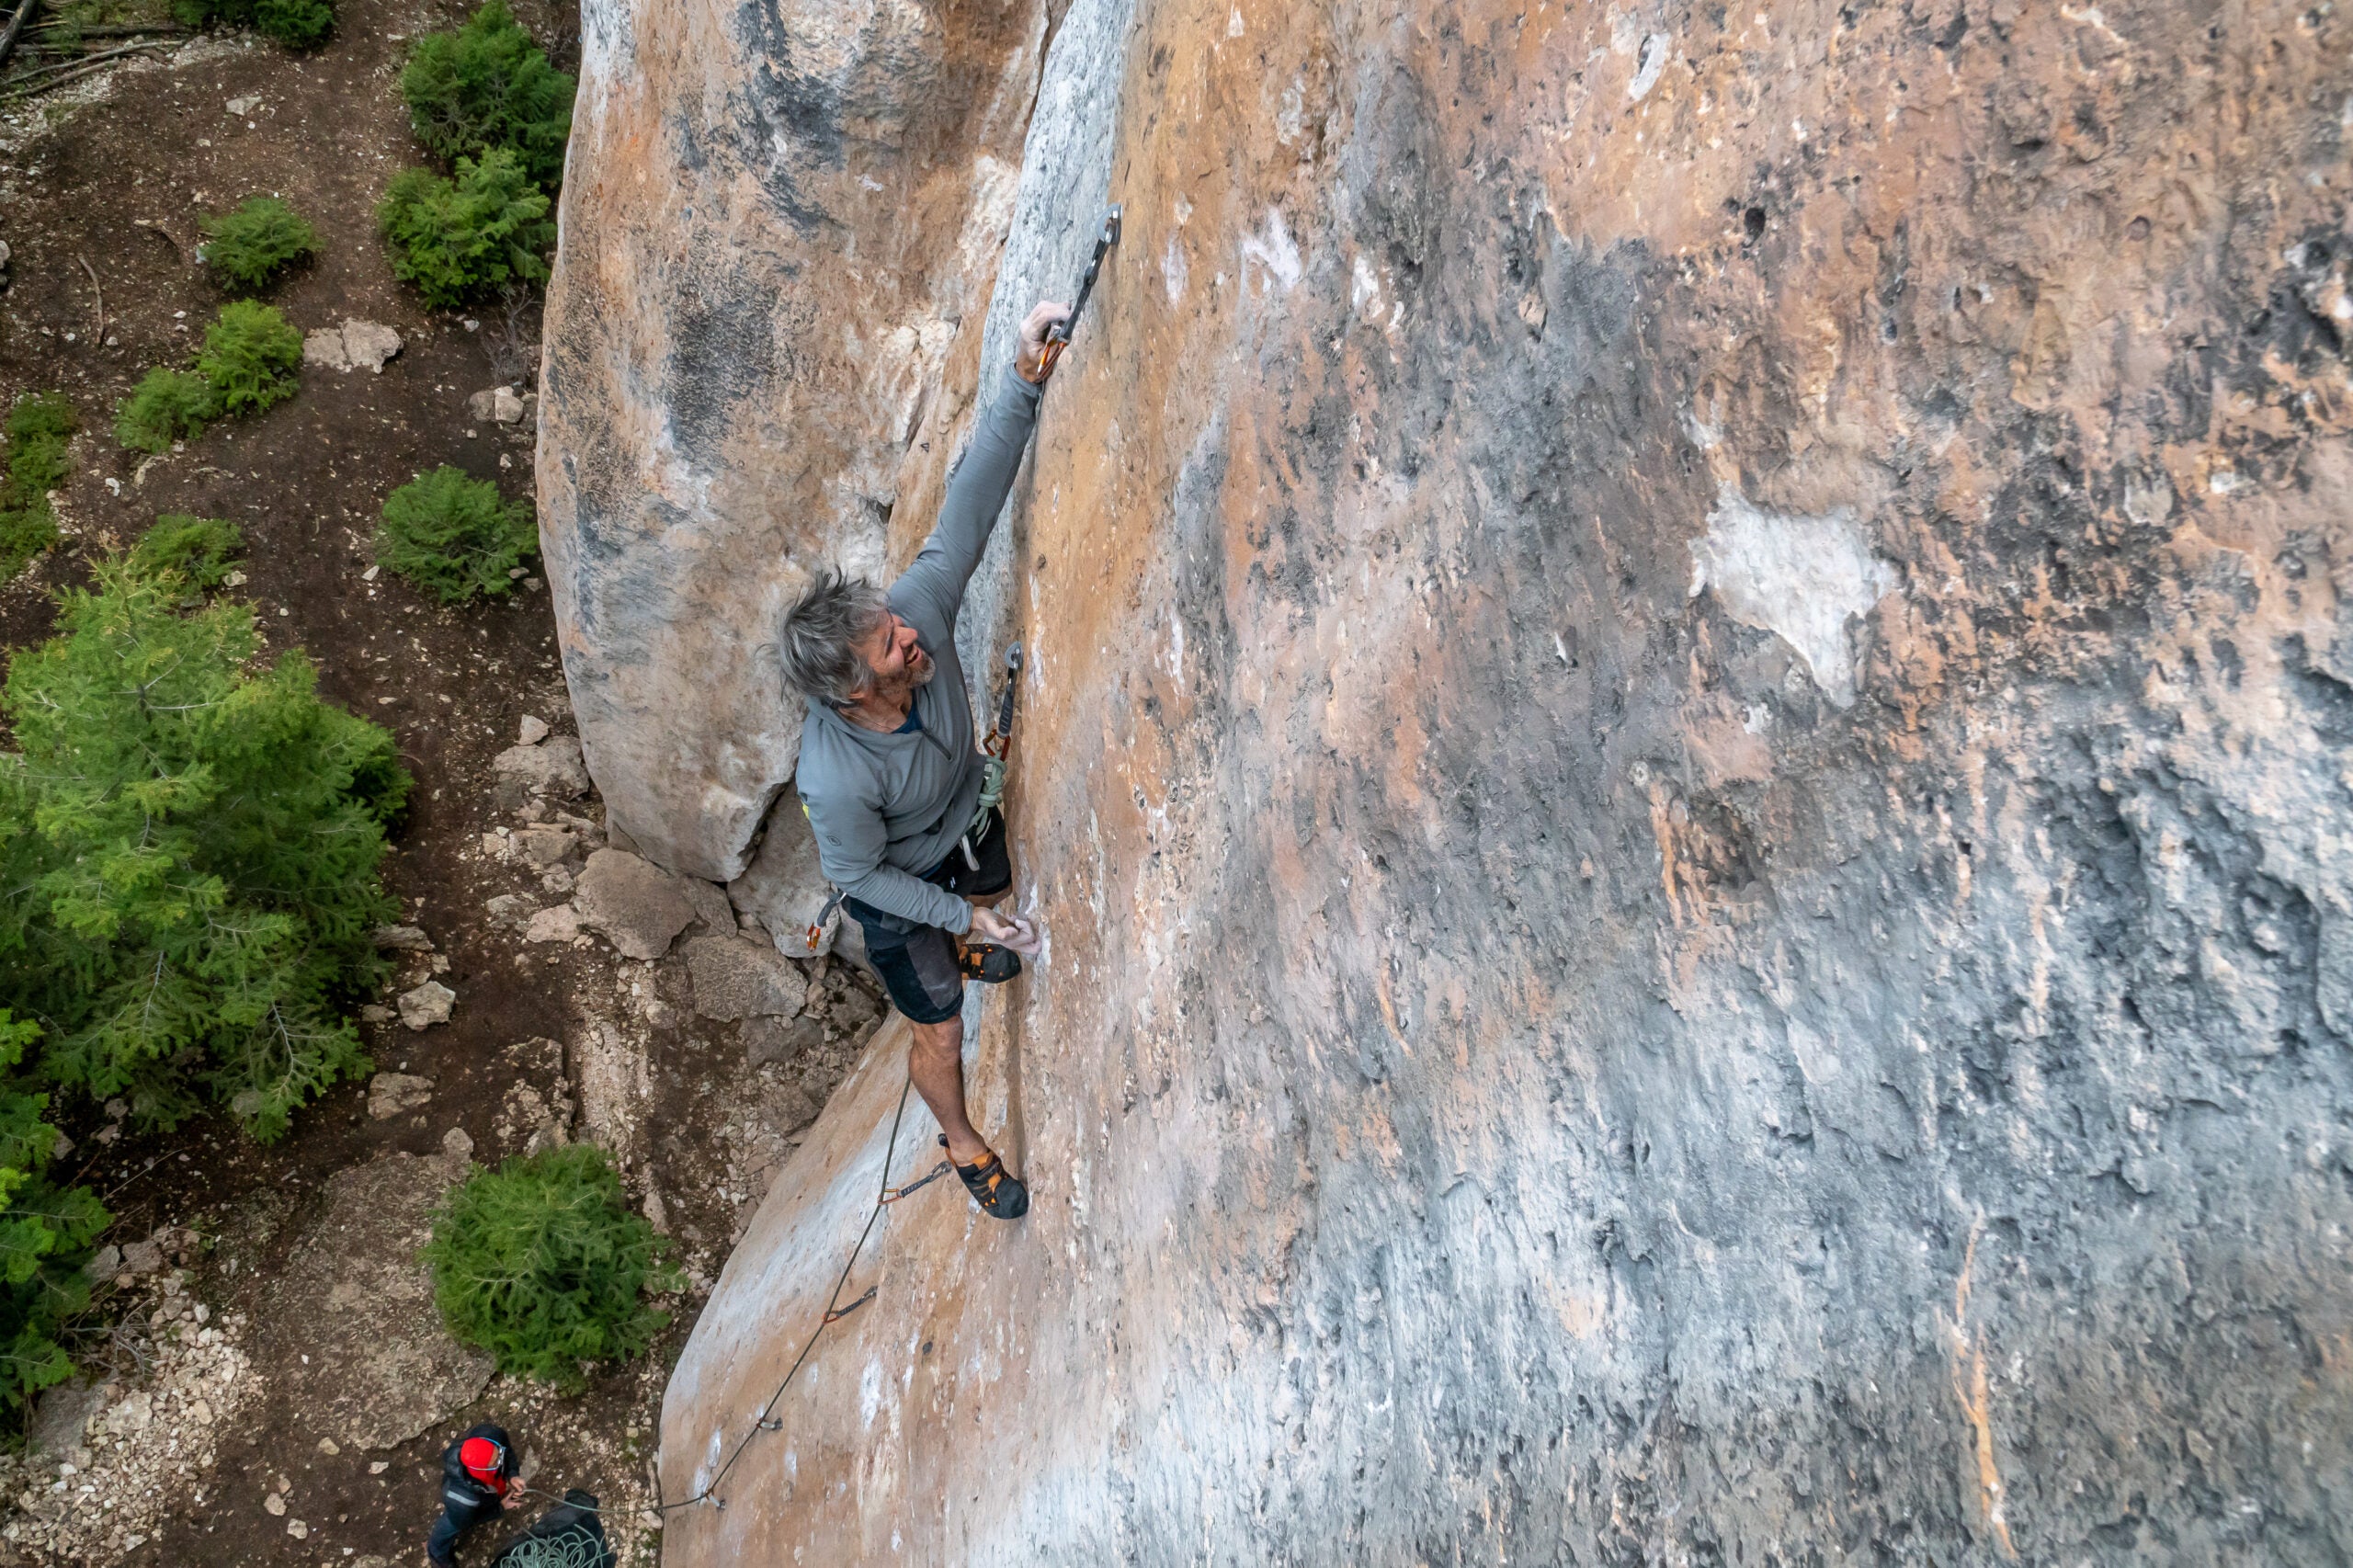 What does it mean to age as a climber? Matt Samet on turning